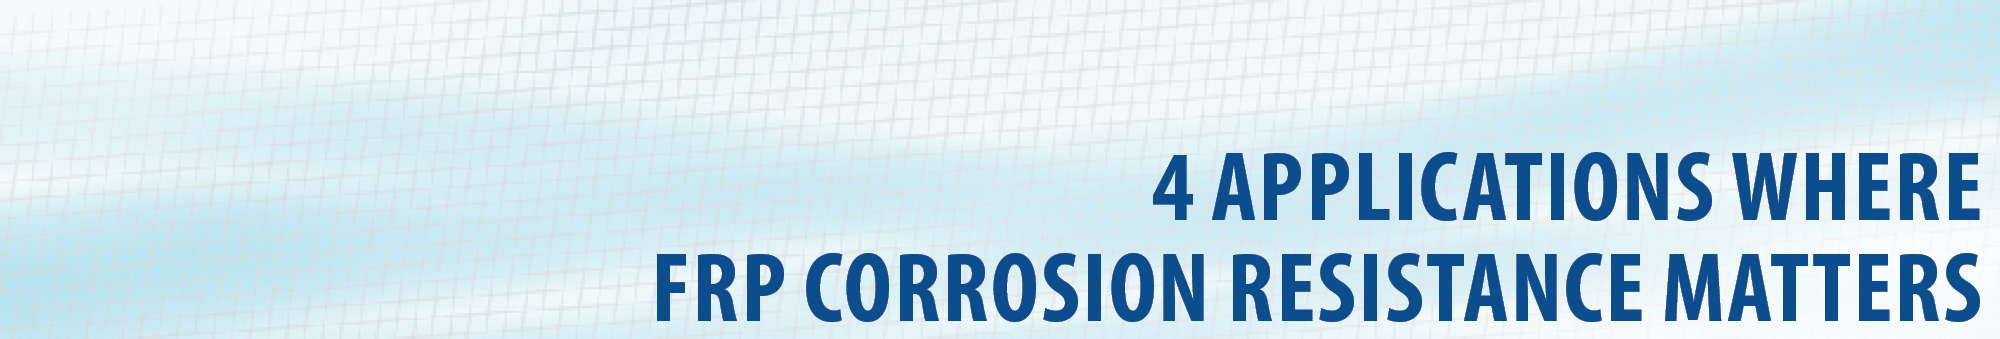 4 Applications Where FRP Corrosion Resistance Matters